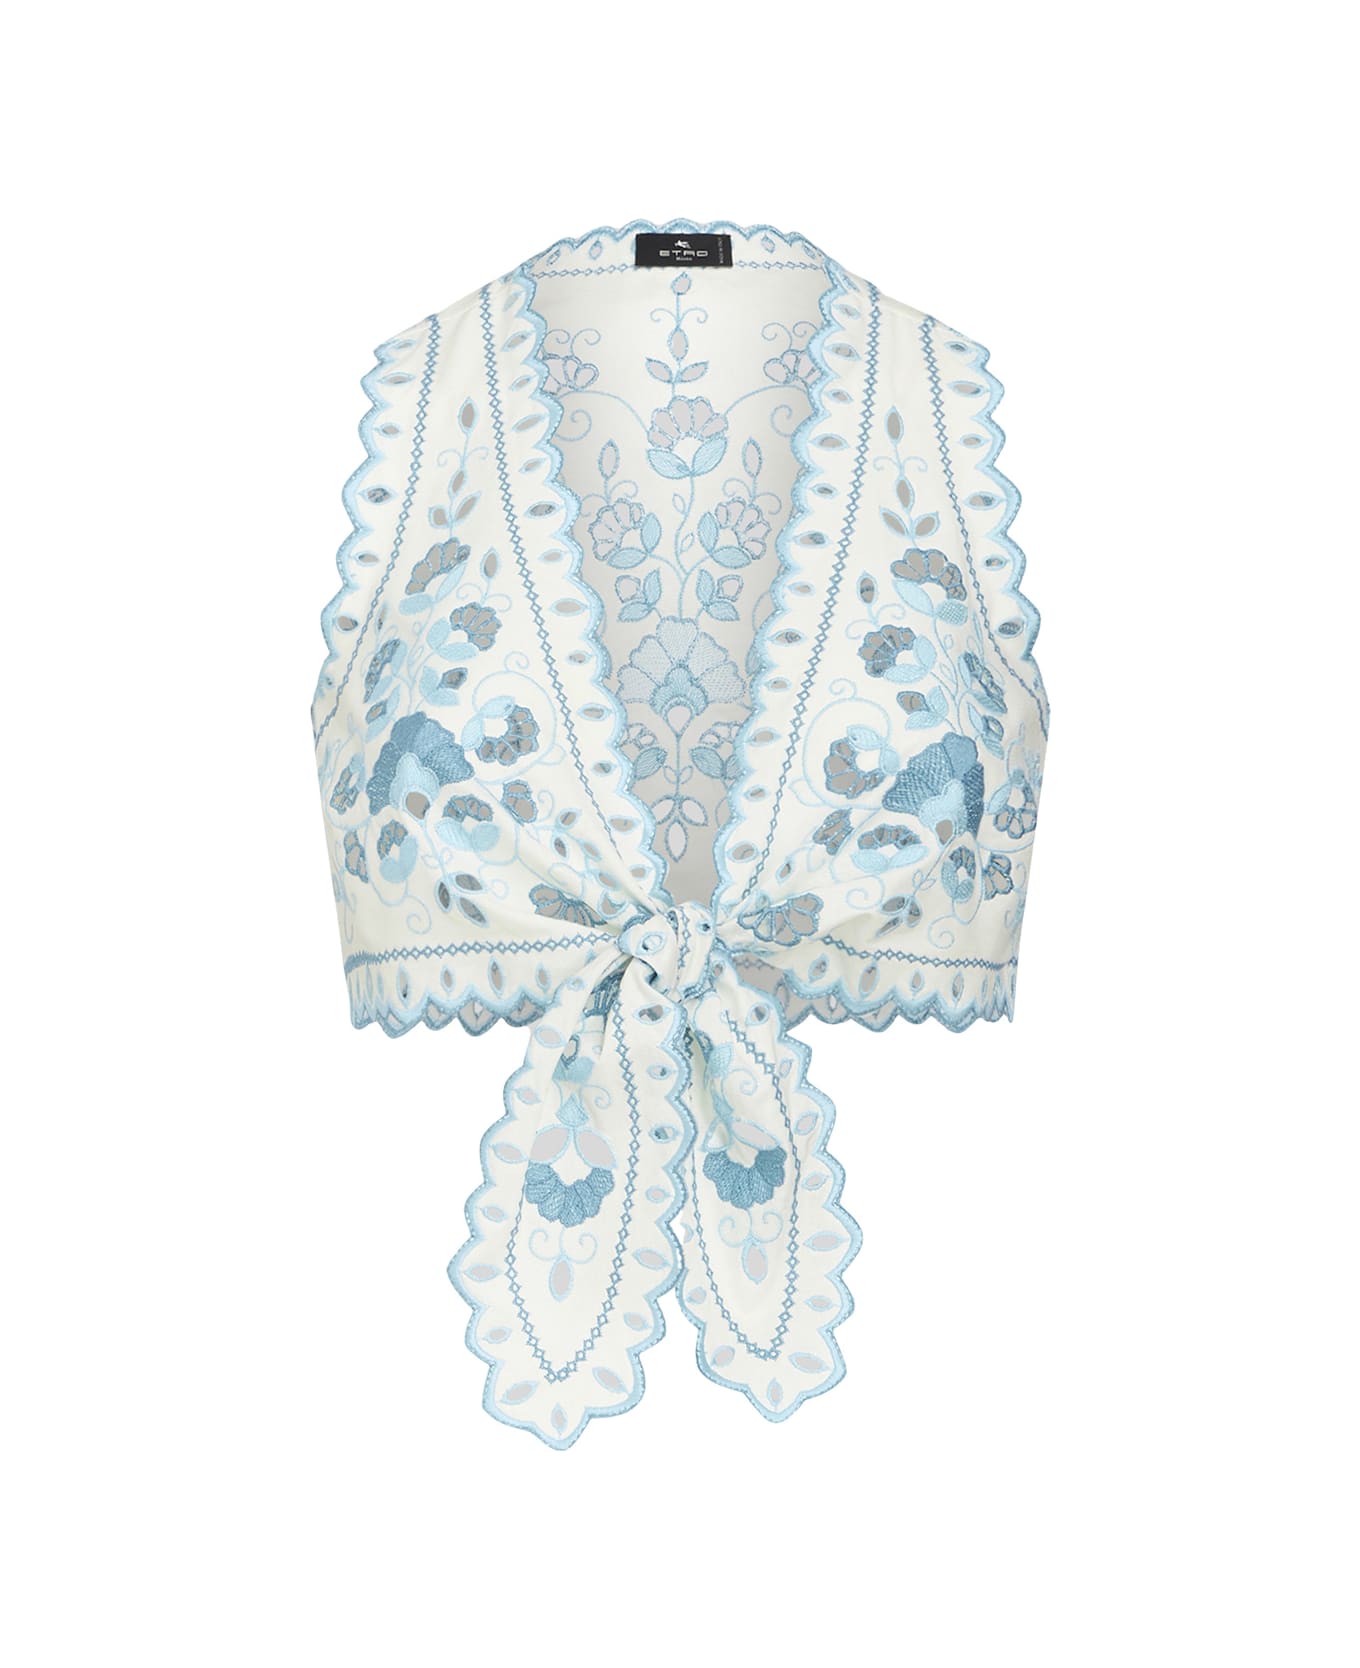 Etro White Crop Top With Bow And Embroidery - Bianco/azzurro